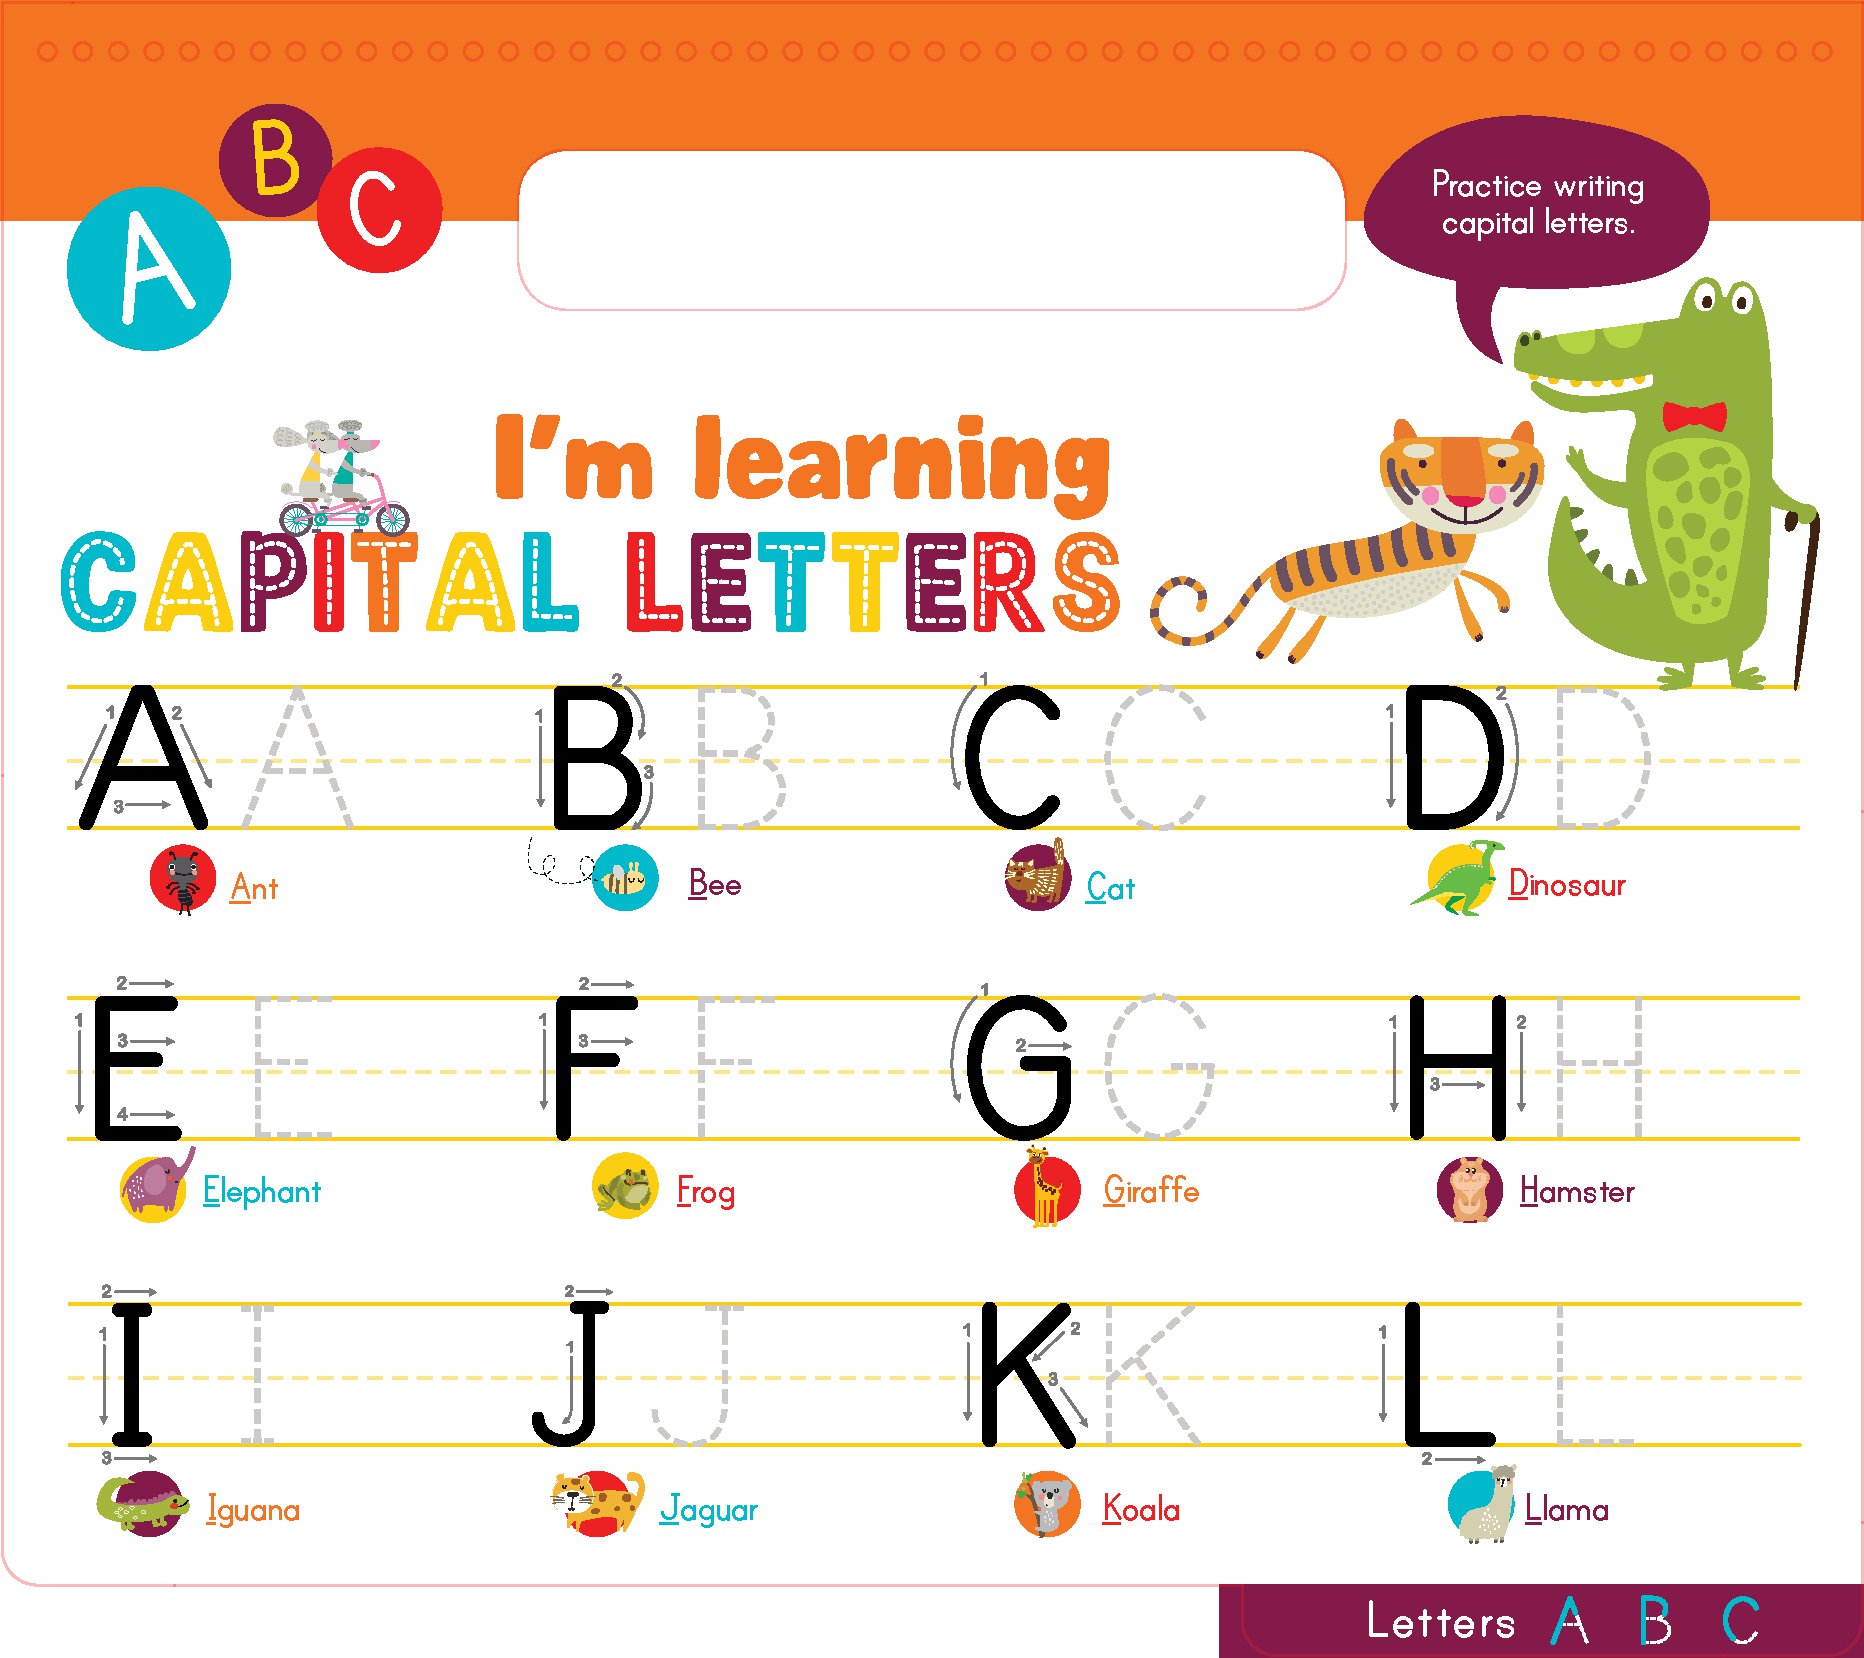 My First Wipe Clean: Letters, Numbers and Shapes